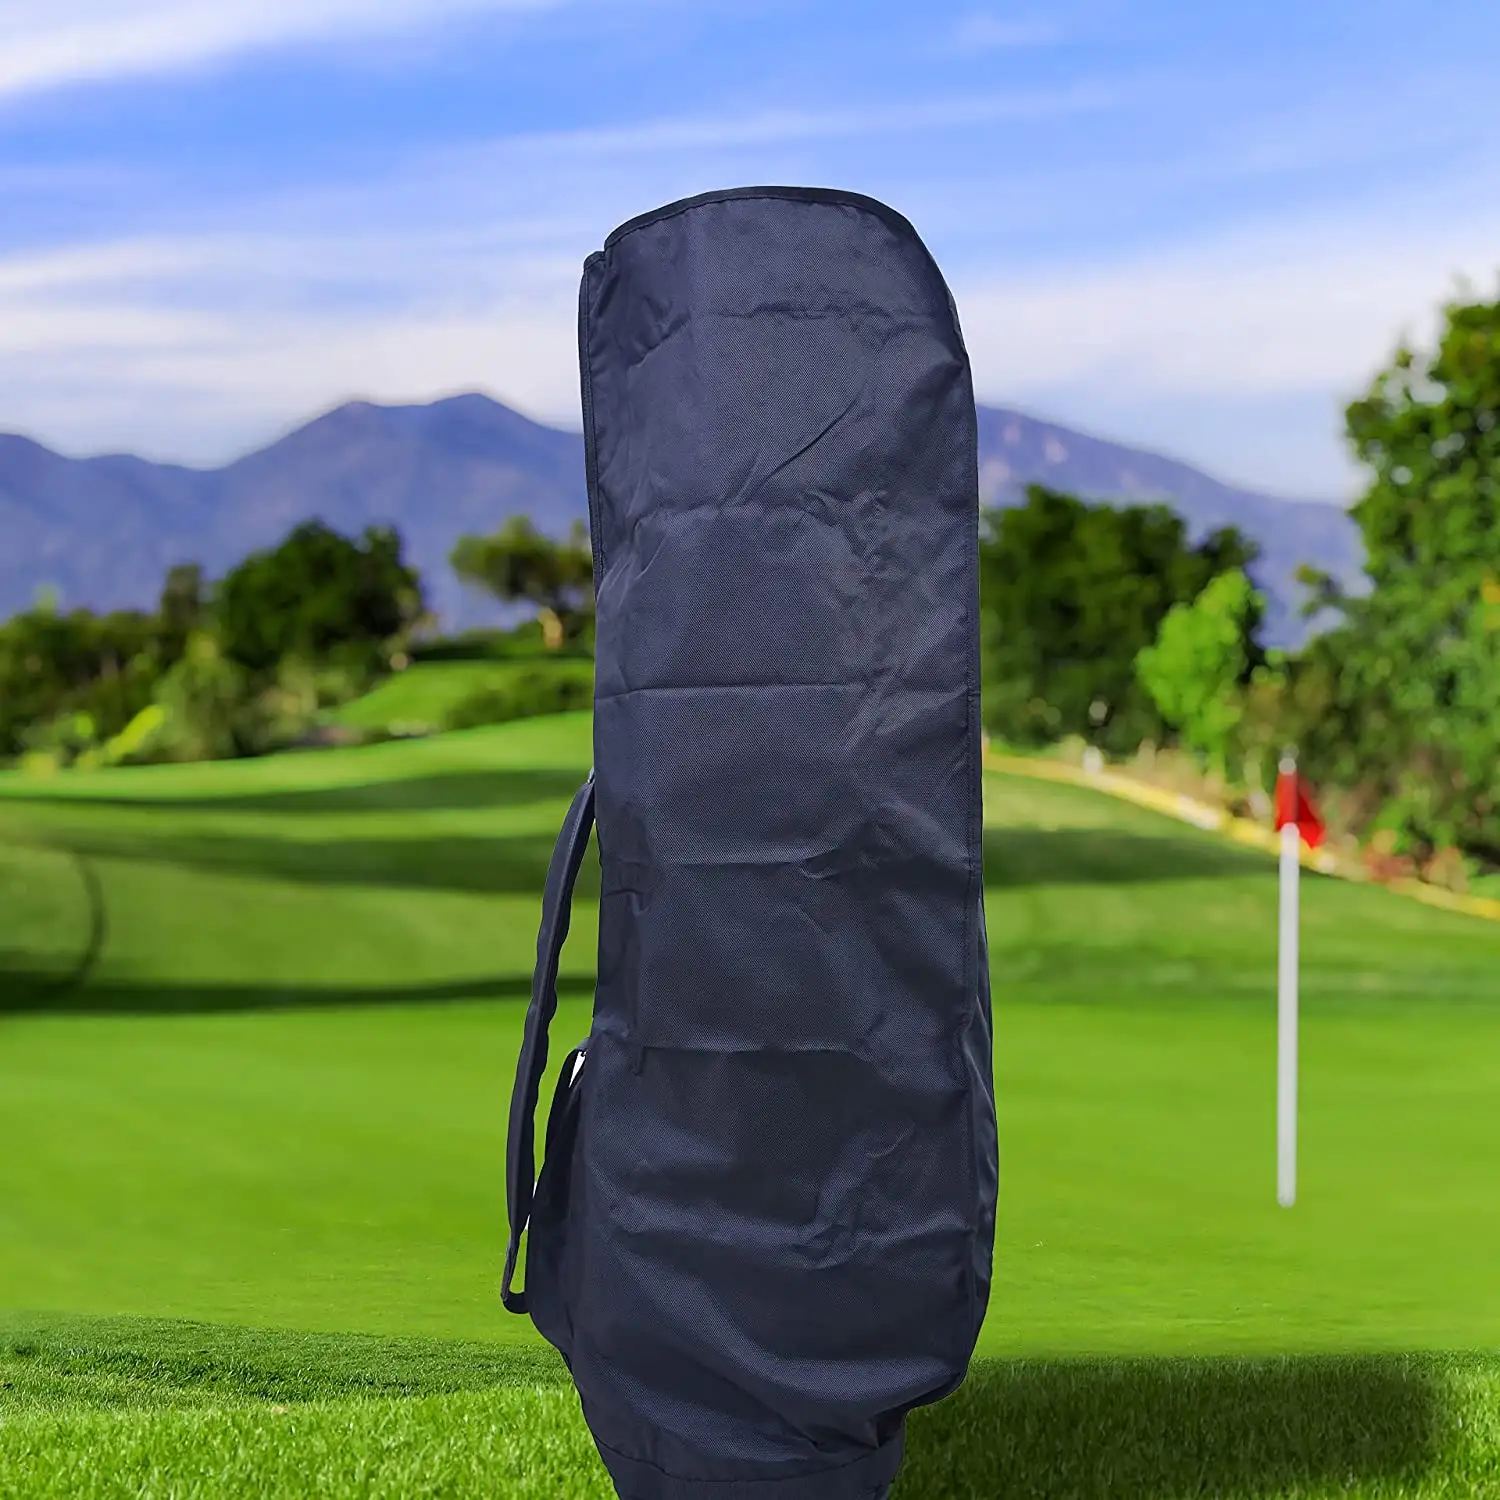 Waterproof Golf Bag Rain Cover, Protection Cover with Hood for Golf Push Carts, Golf Club